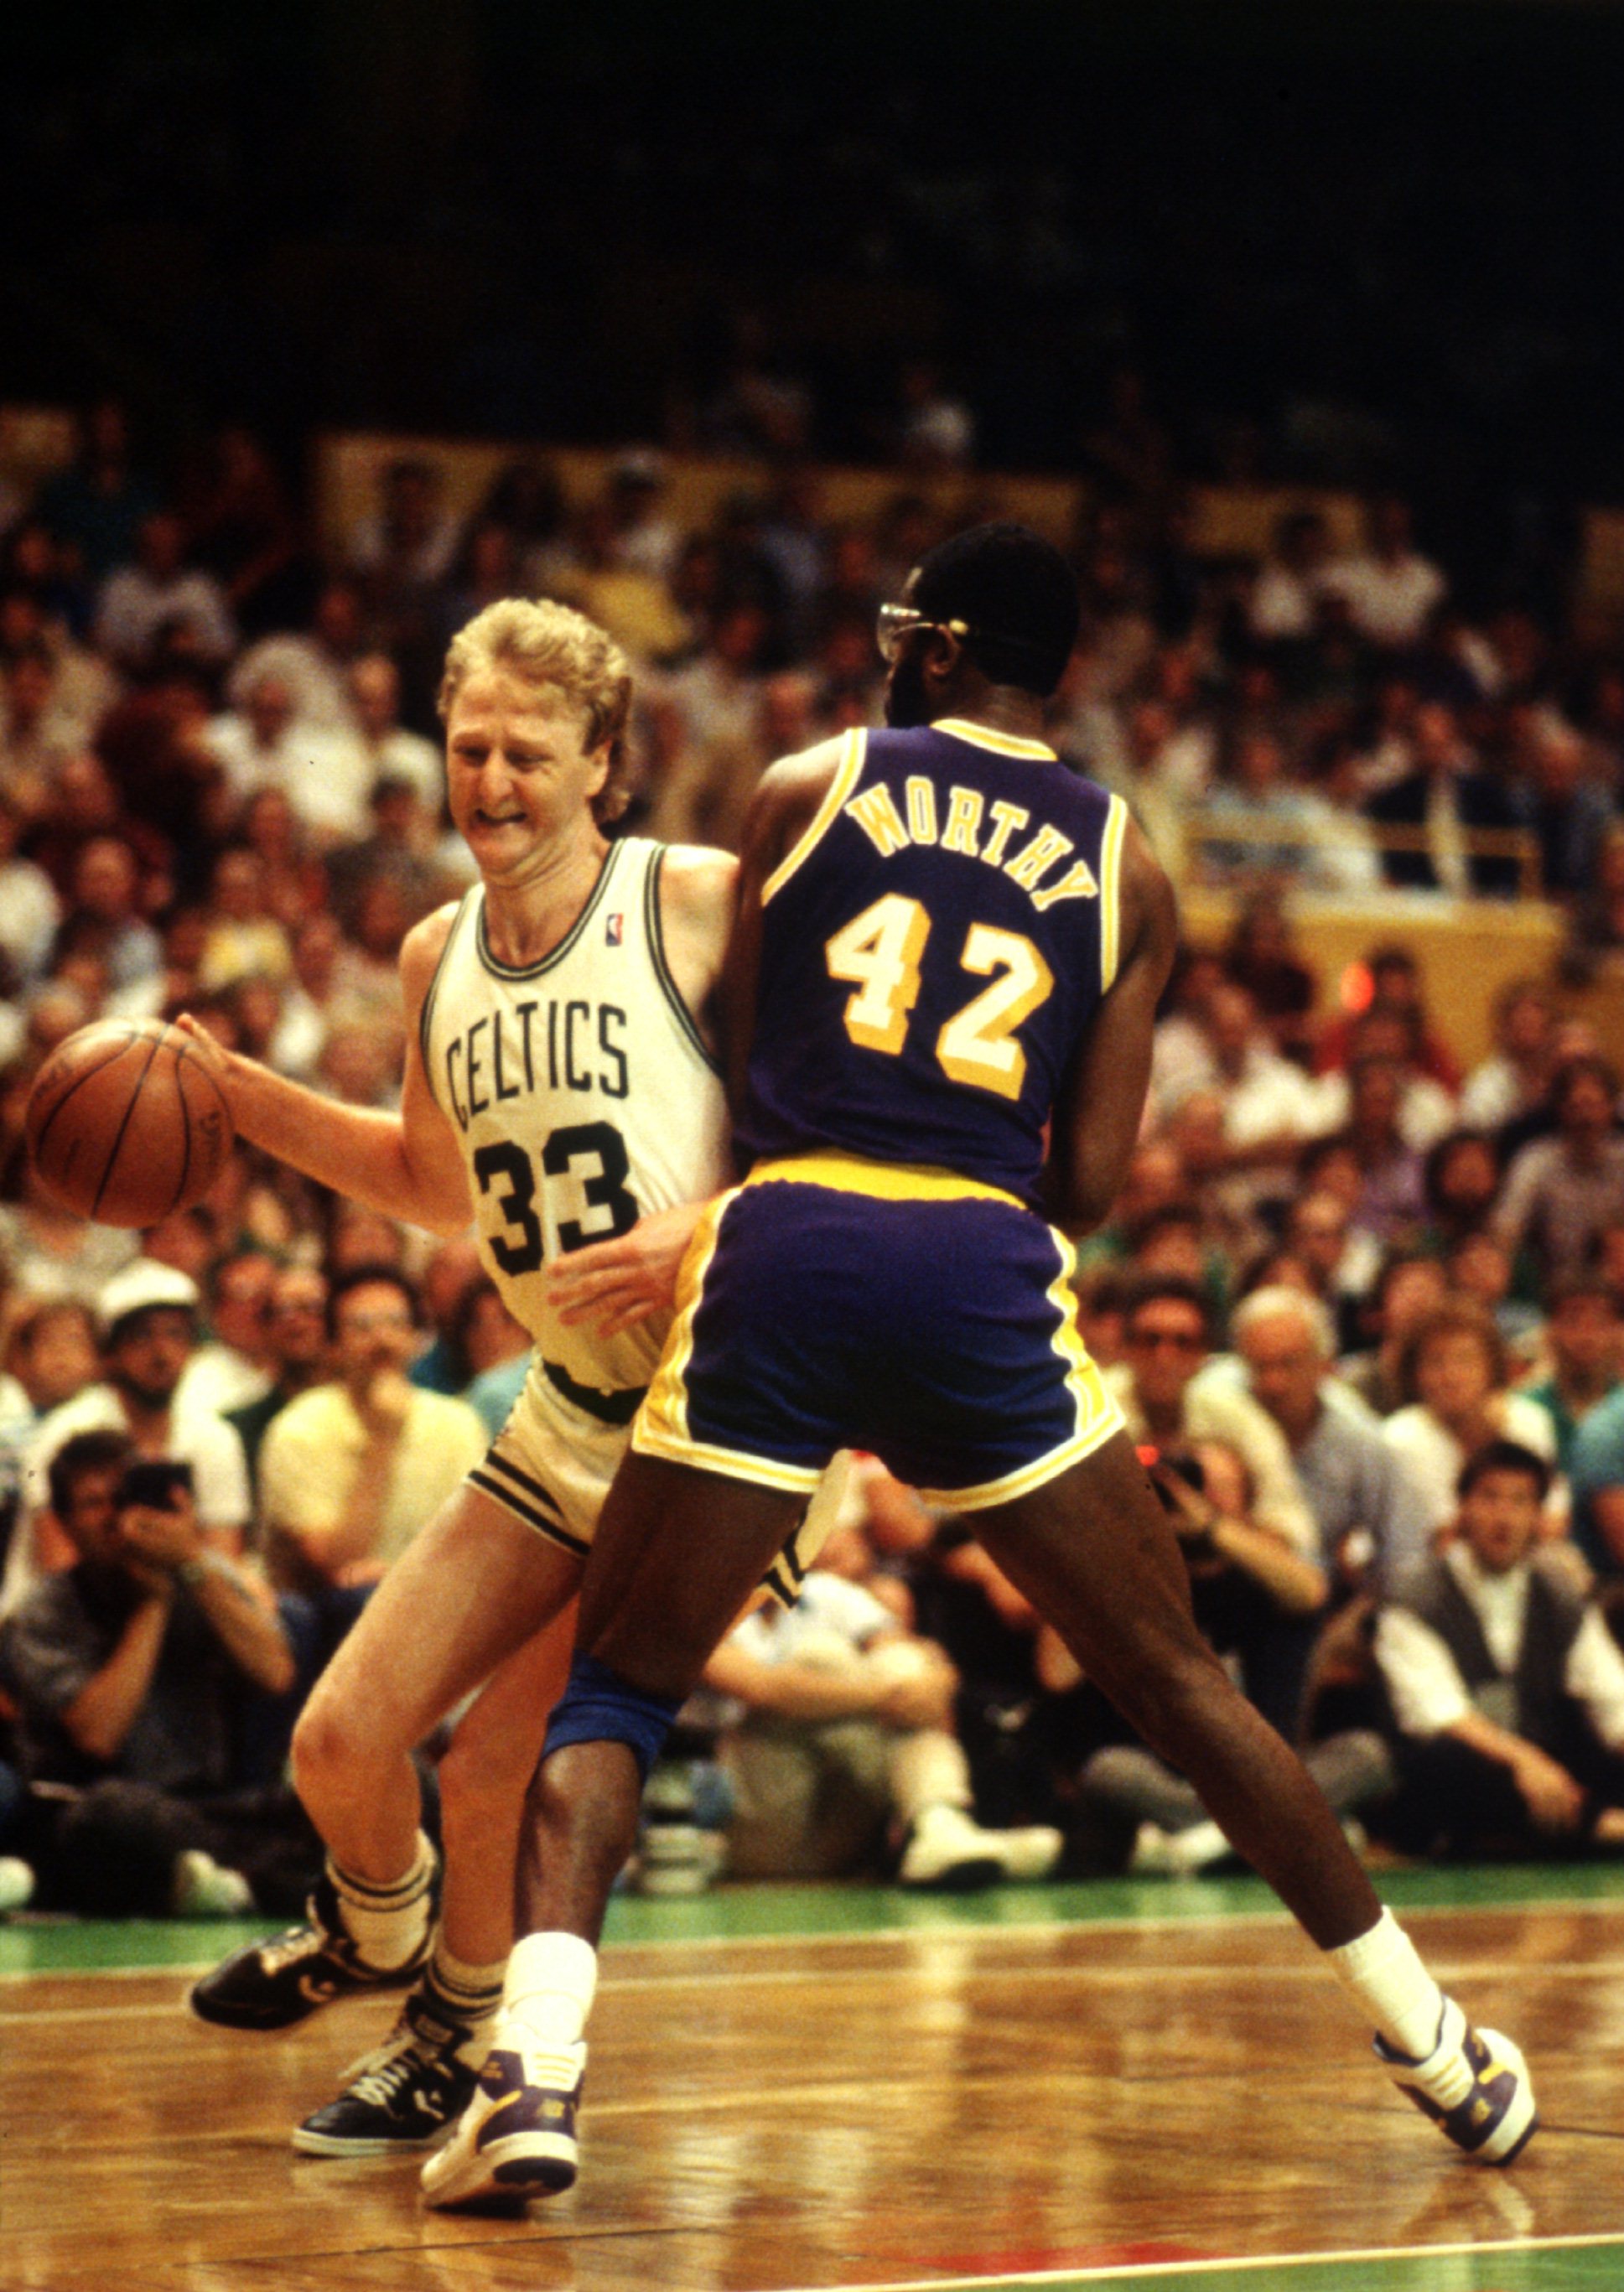 JUN 1987:  BOSTON FORWARD LARRY BIRD TRIES TO DRIVE AROUND LOS ANGELES FORWARD JAMES WORTHY DURING THE CELTICS GAME VERSUS THE LAKERS IN THE NBA FINALS AT THE BOSTON GARDEN IN  BOSTON, MASSACHUSETTS. Mandatory Credit: Jonathan Daniel/ALLSPORT